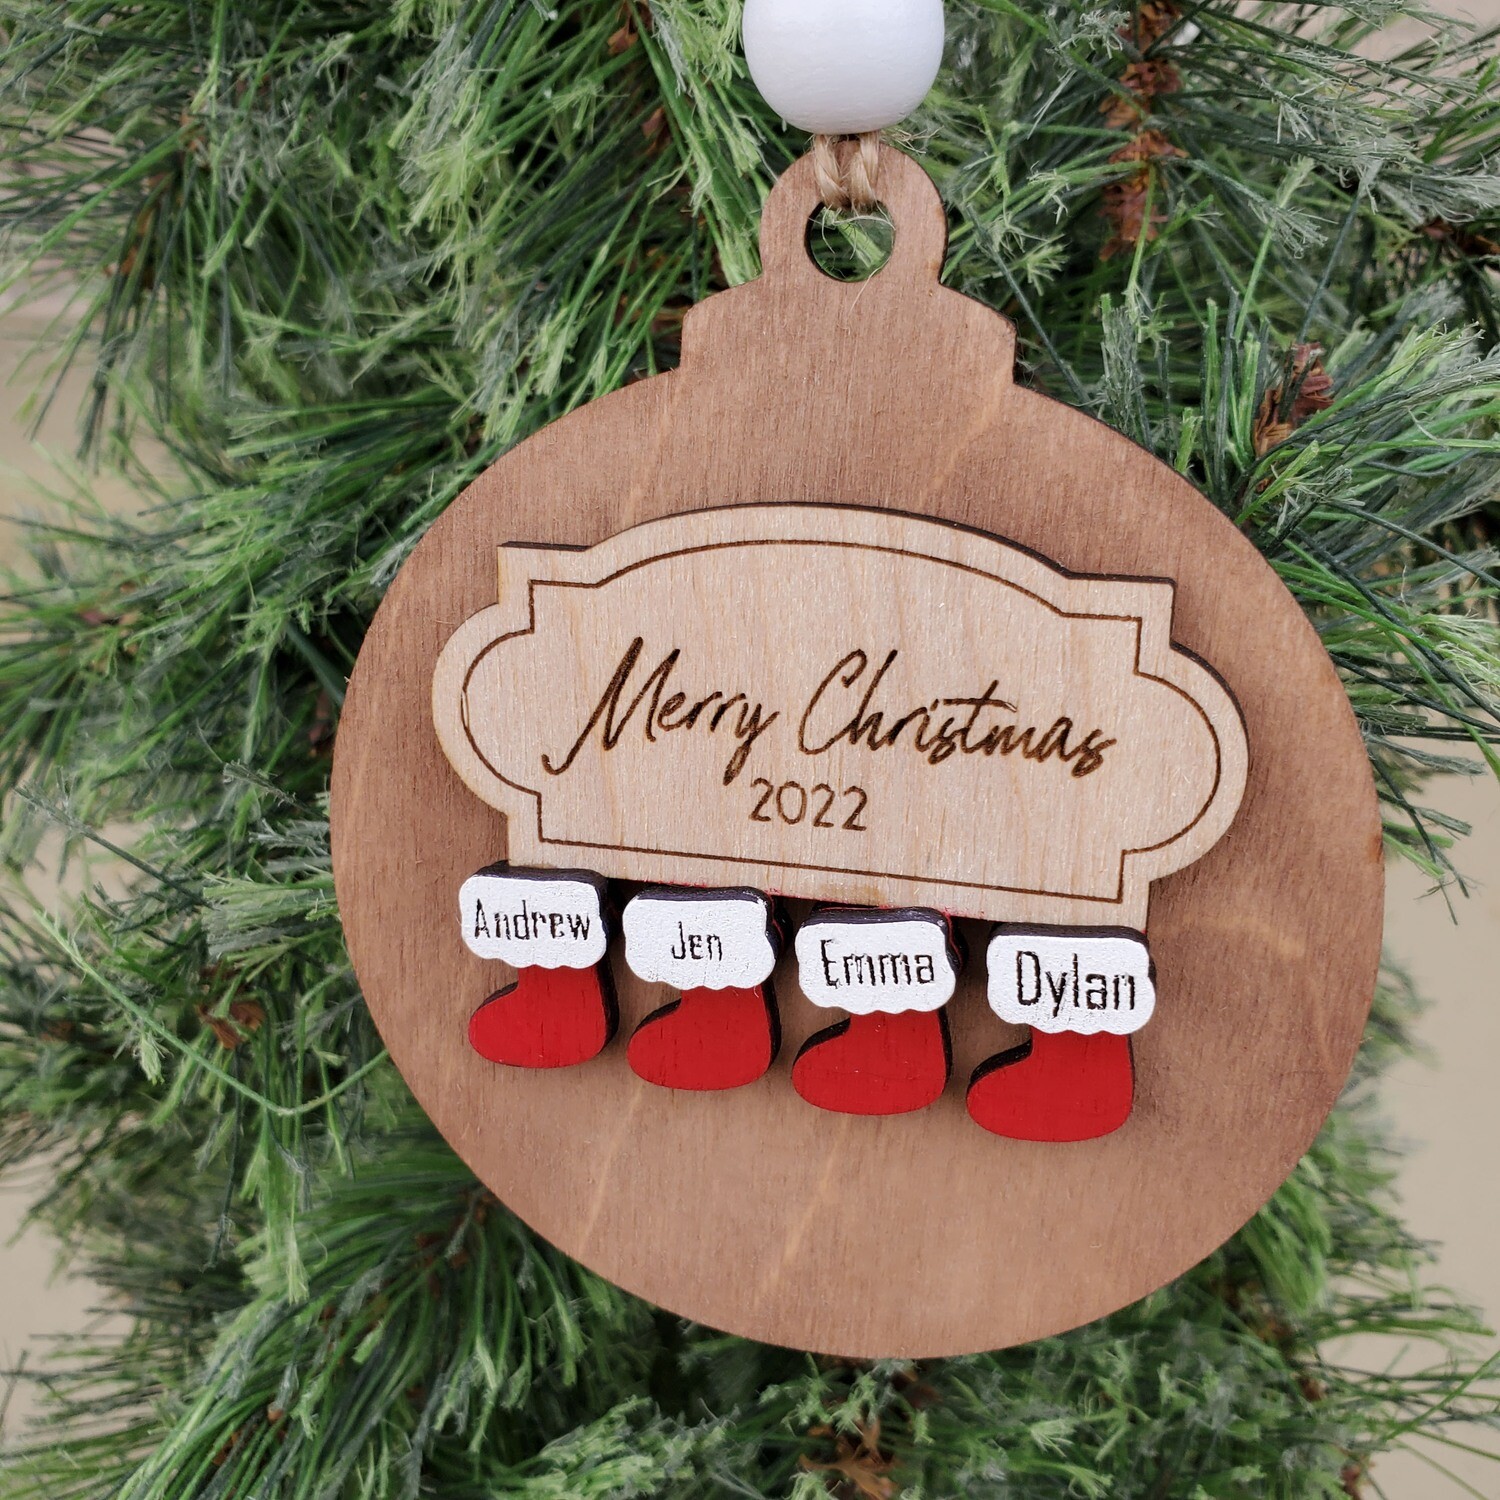 Personalized family ornament